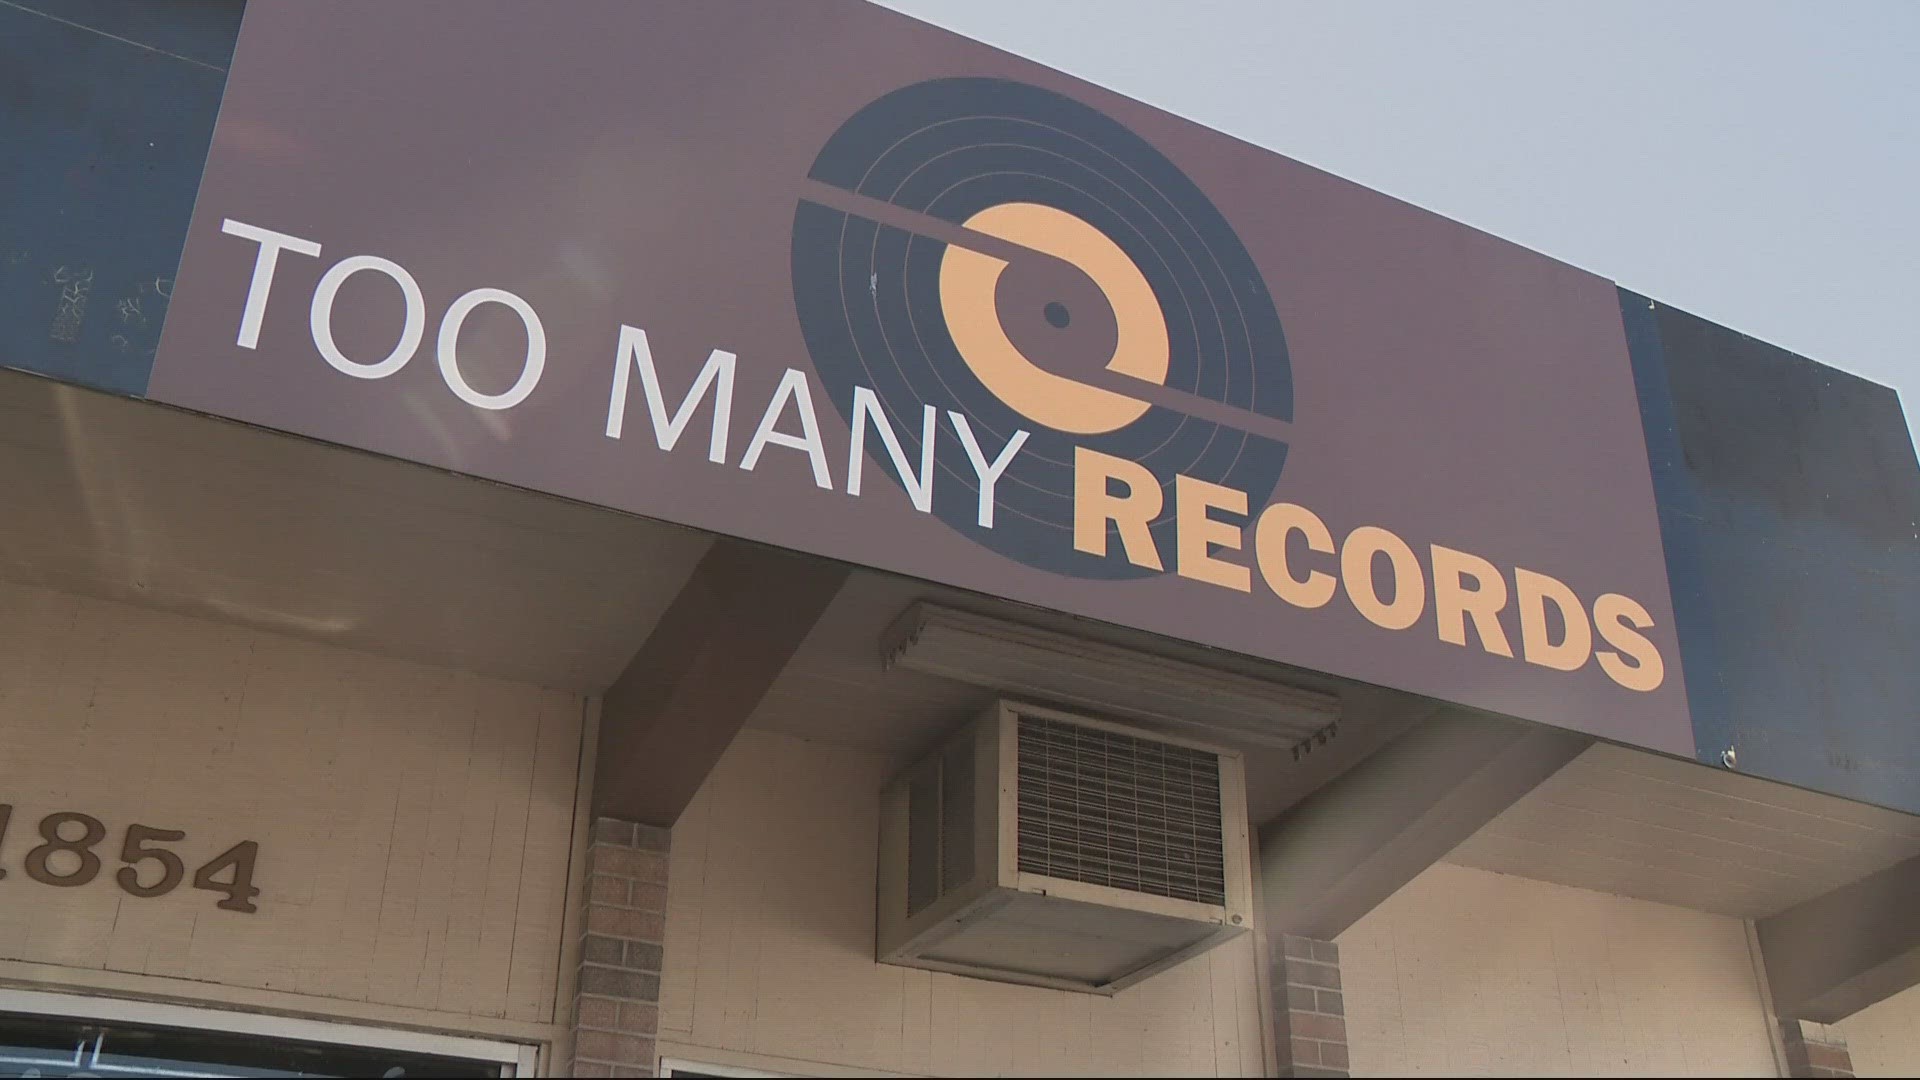 Too Many Records had a line outside before it opened this morning for its first Record Store Day deal, with some sharing why vinyl has made a comeback.